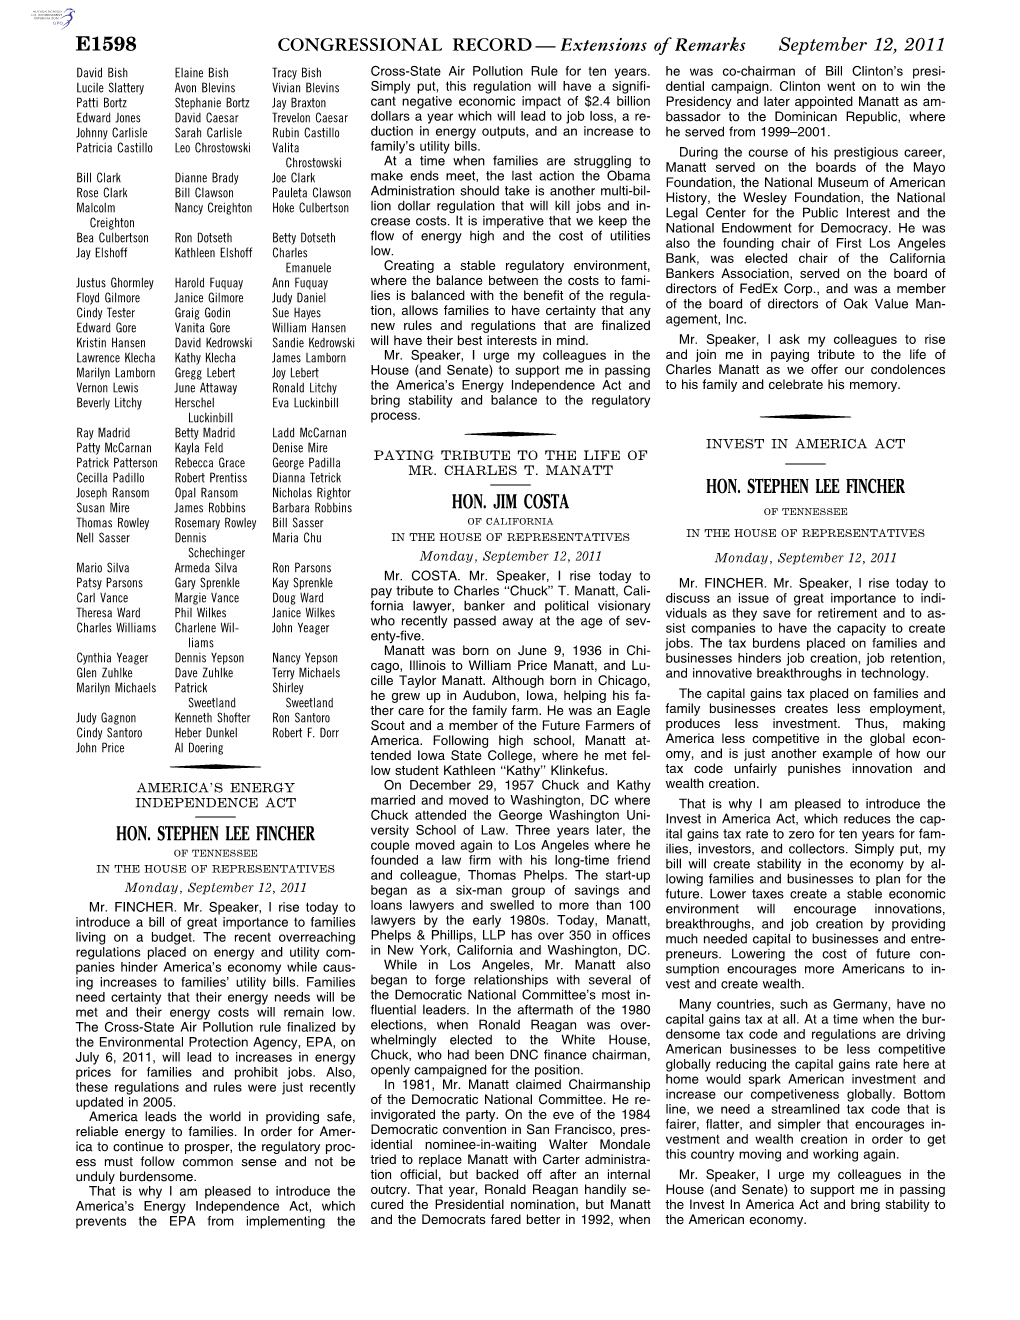 CONGRESSIONAL RECORD — Extensions of Remarks September 12, 2011 David Bish Elaine Bish Tracy Bish Cross-State Air Pollution Rule for Ten Years